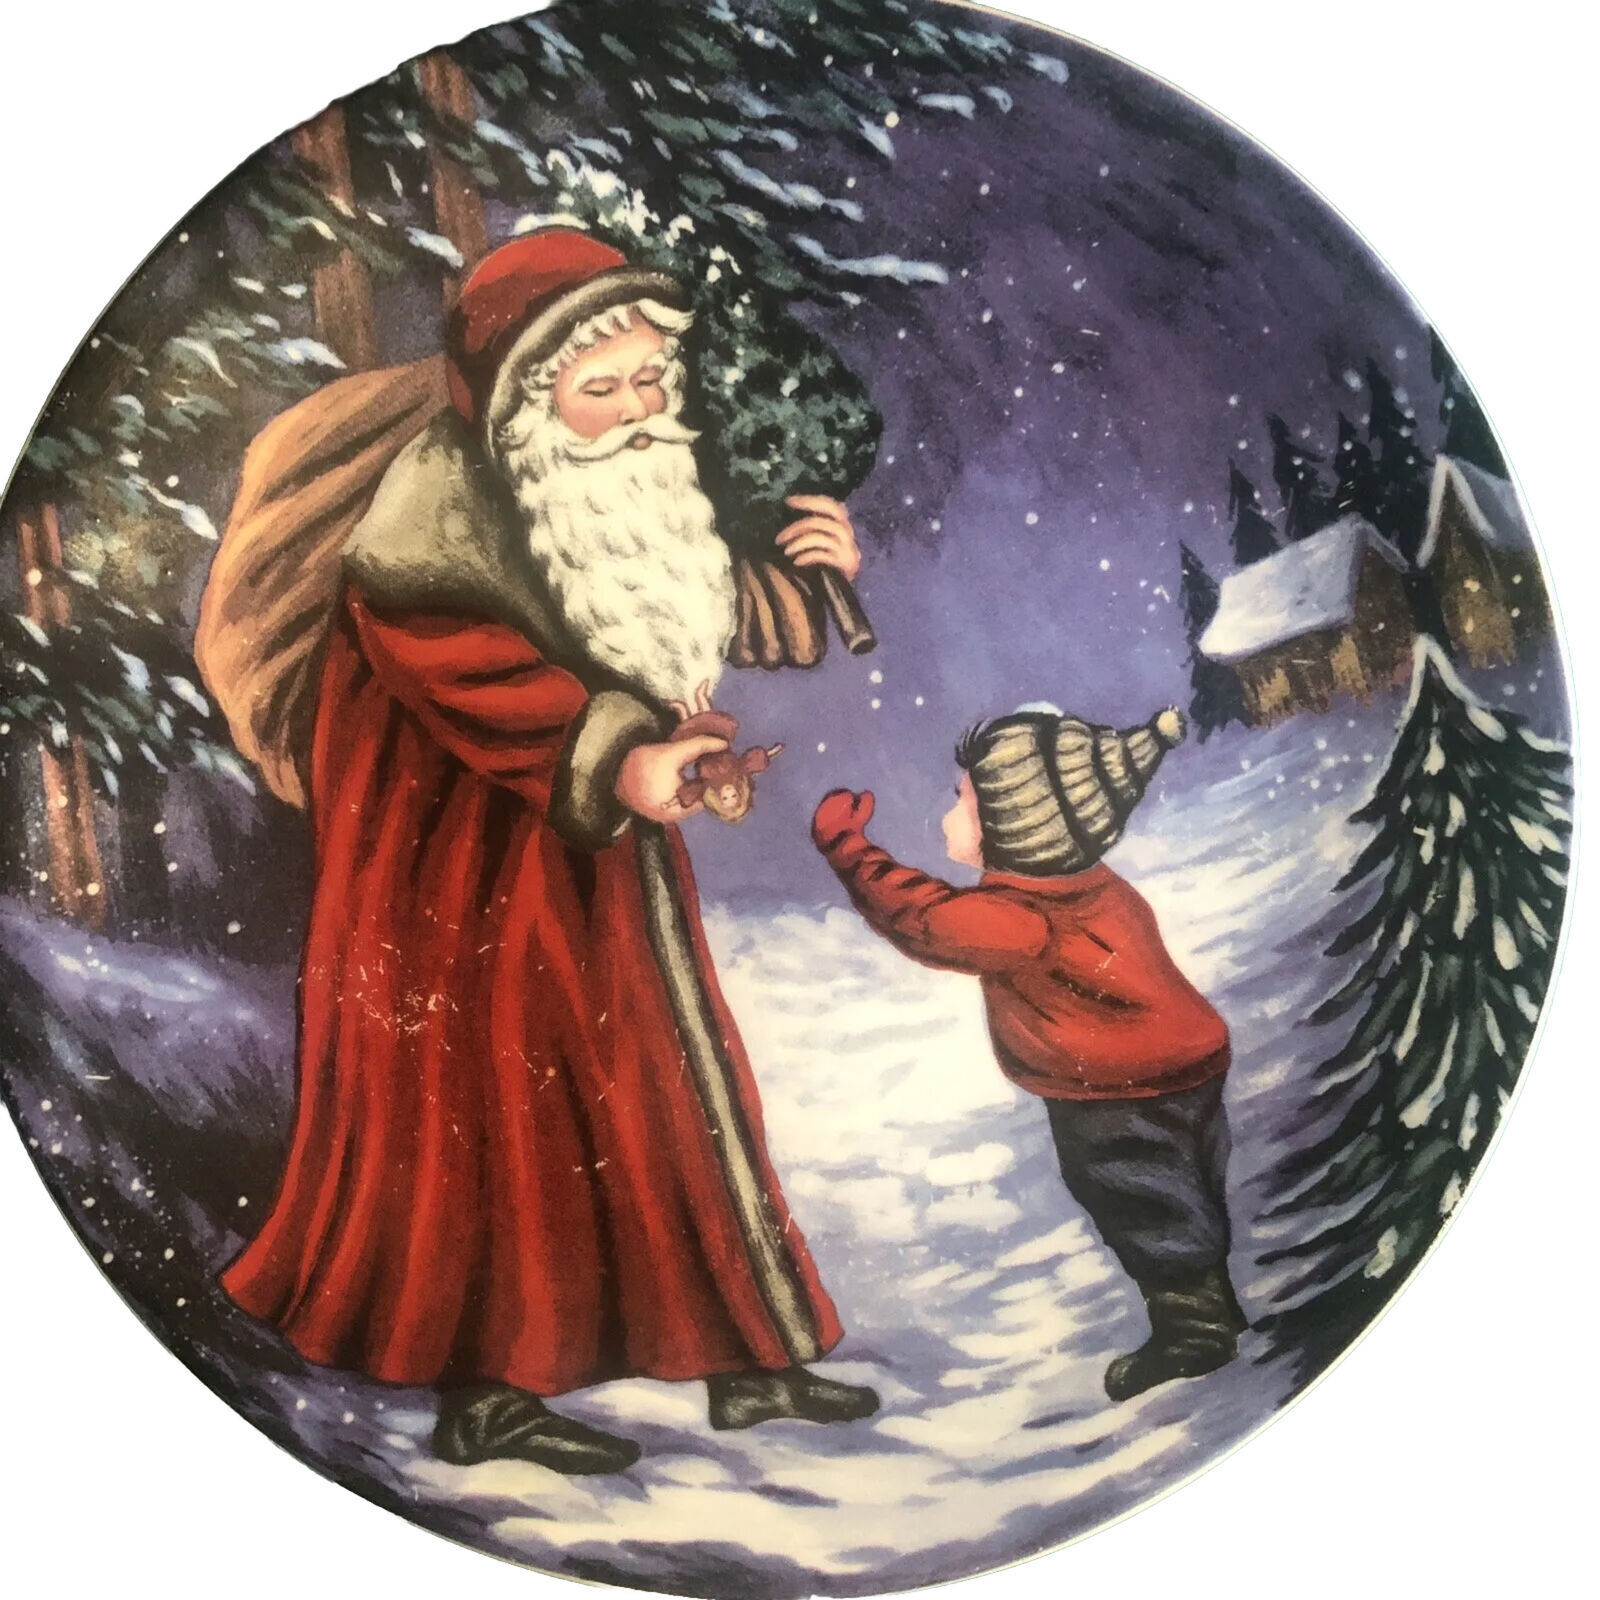 Old World Style Victorian Christmas Holiday Plate 8 1/4 Inch Diameter Santa